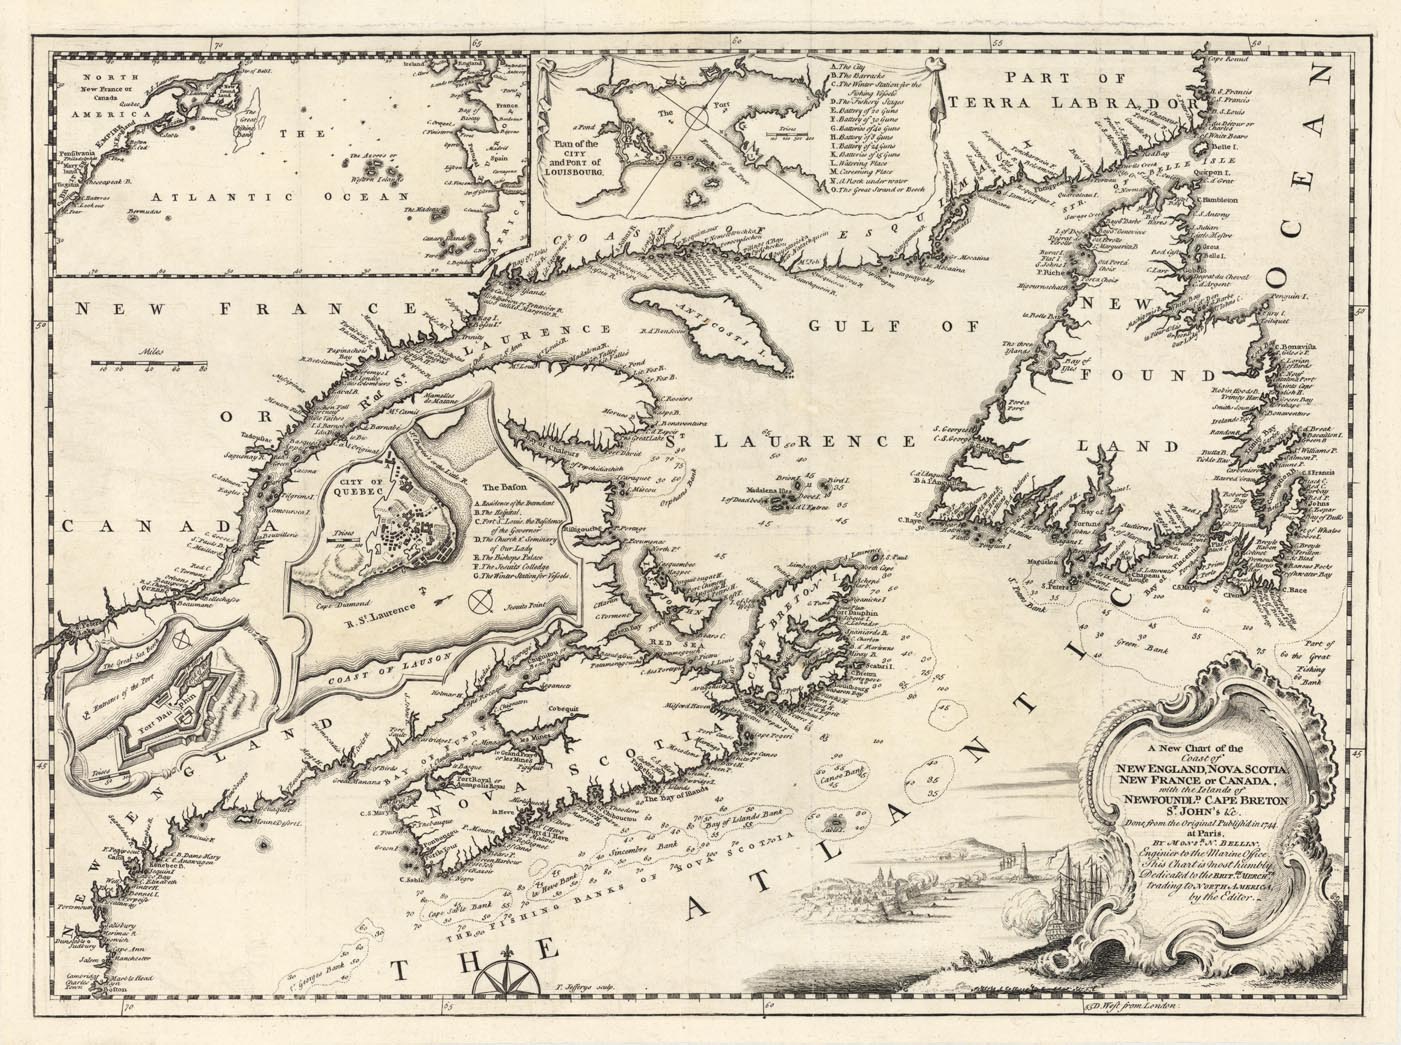 New Chart of the Coast of New England, Nova Scotia, New France or Canada. A,